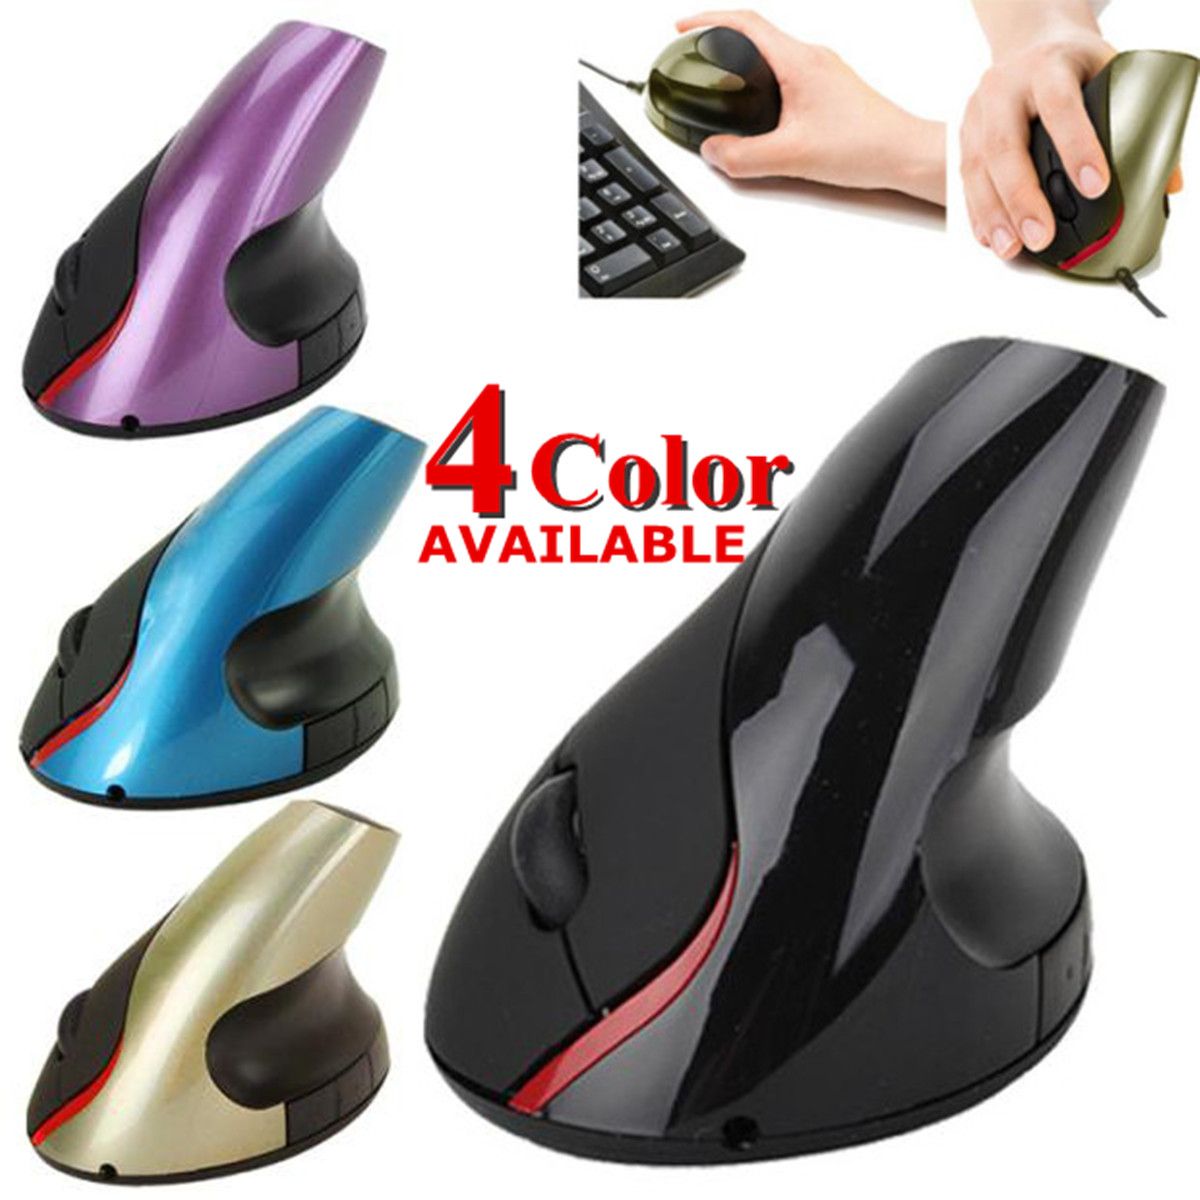 1200DPI-USB-Wired-Ergonomic-Wrist-Healing-Vertical-Optical-Mouse-For-PC-Laptop-1288999